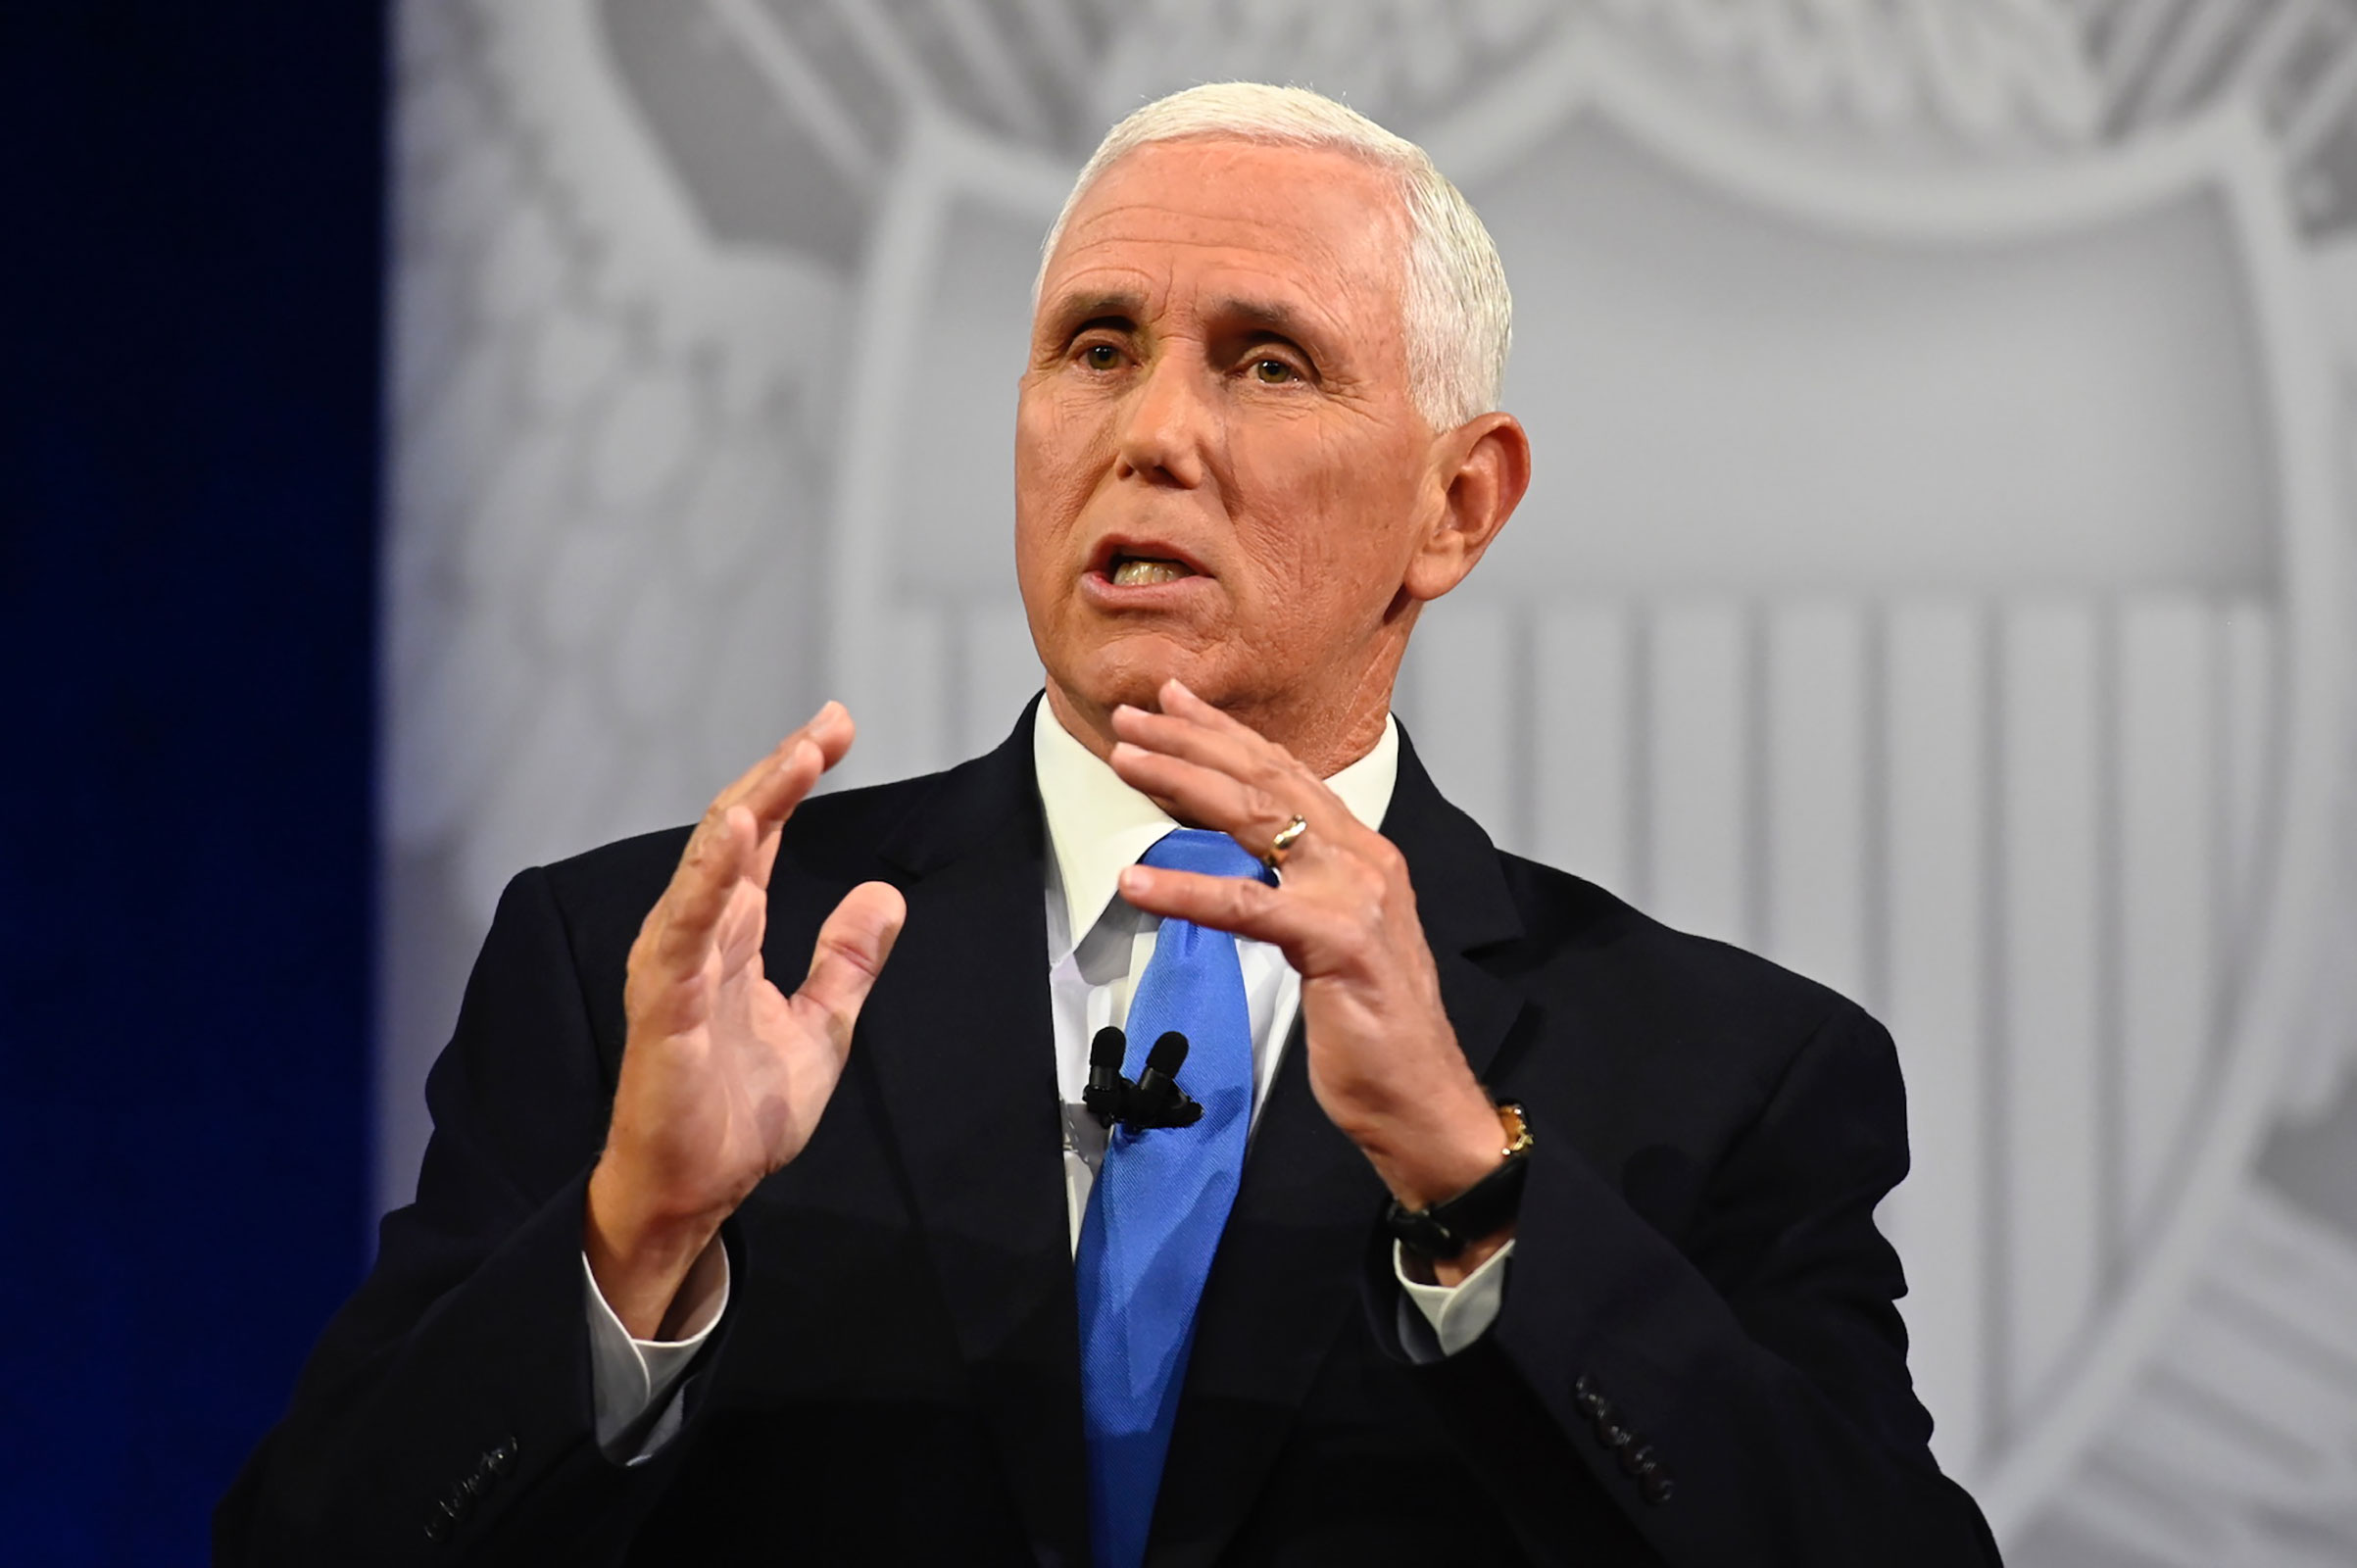 Former Vice President Mike Pence participates in a CNN Republican Presidential Town Hall moderated by CNN’s Dana Bash at Grand View University in Des Moines, Iowa, on Wednesday.